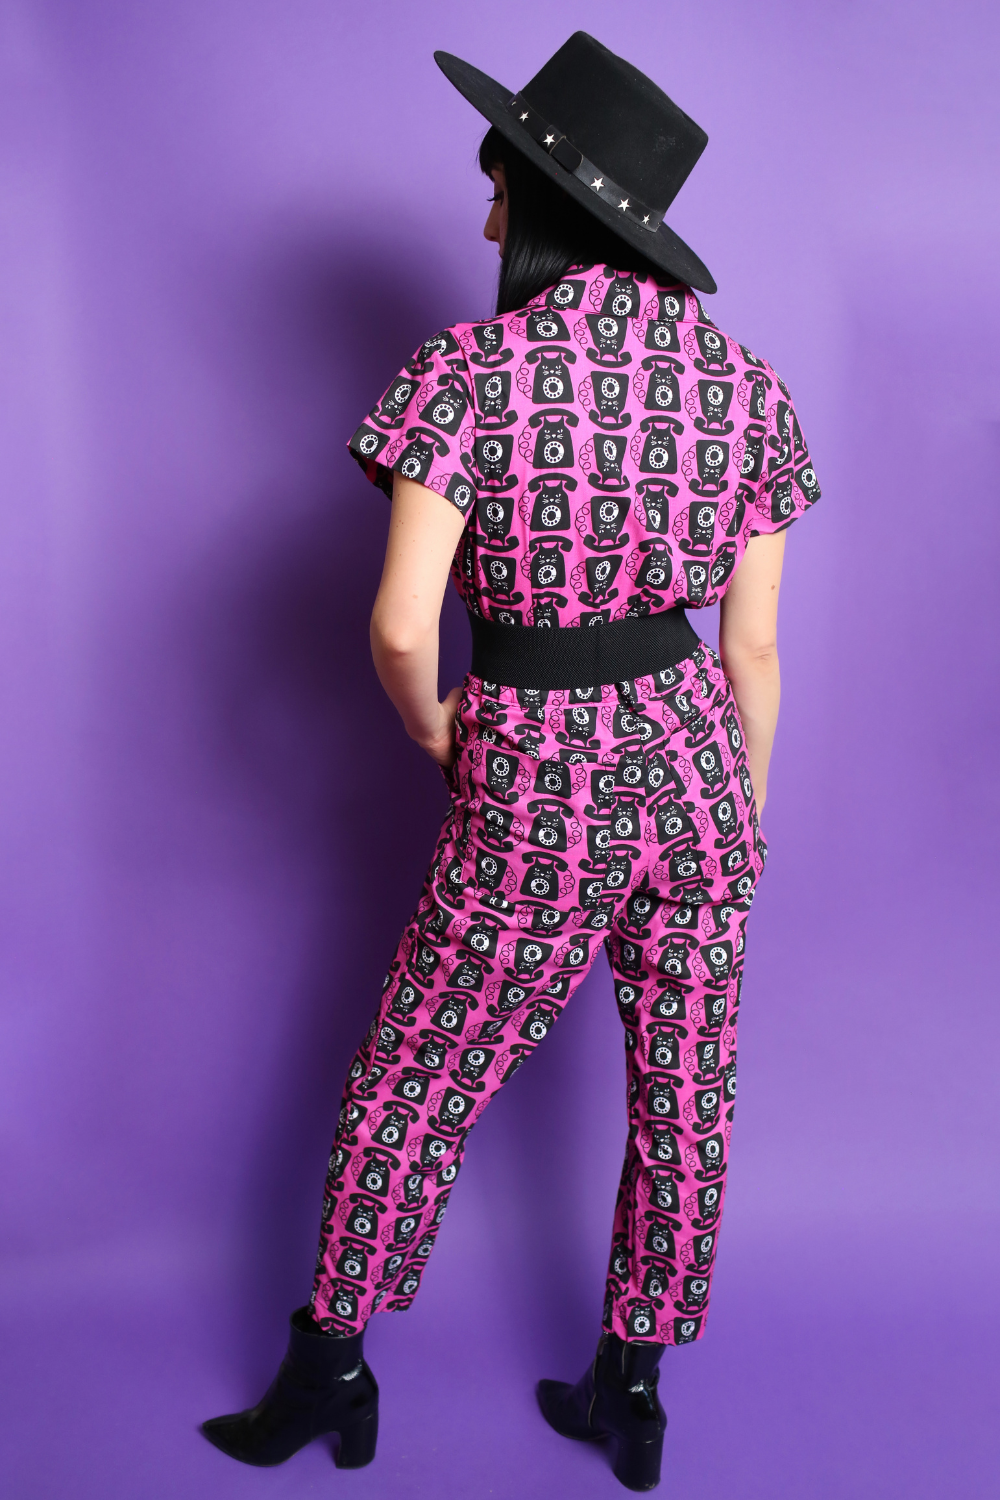 Black haired model in black hat and pink and black printed jumpsuit